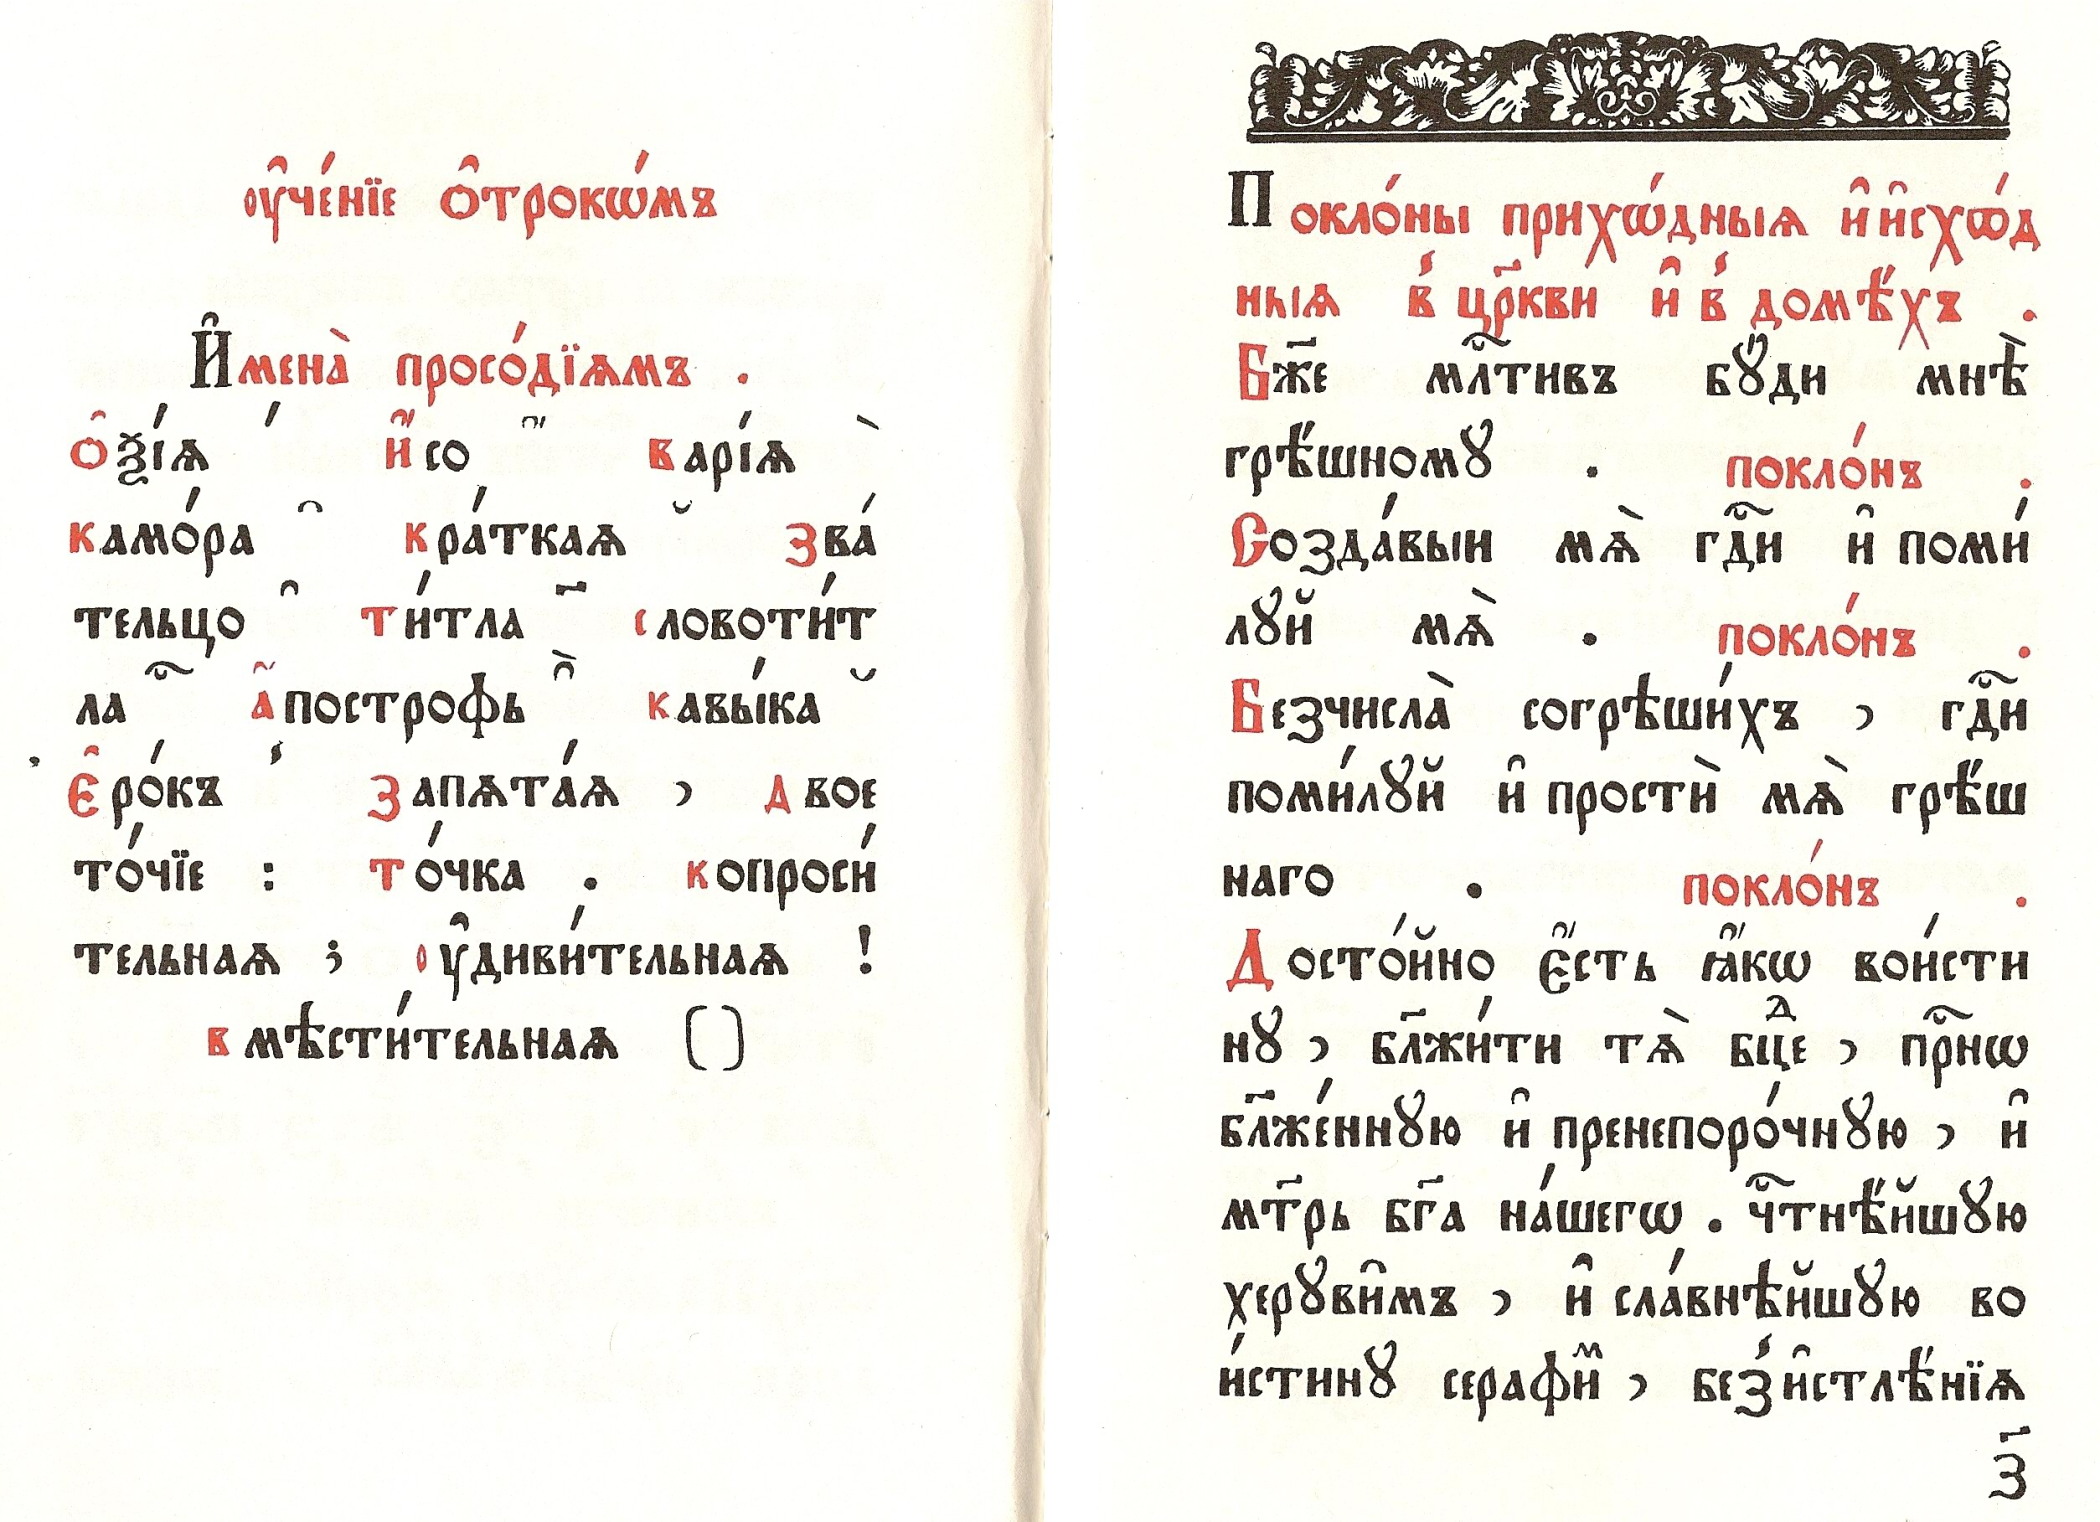 Slavonic With Old Russian 86